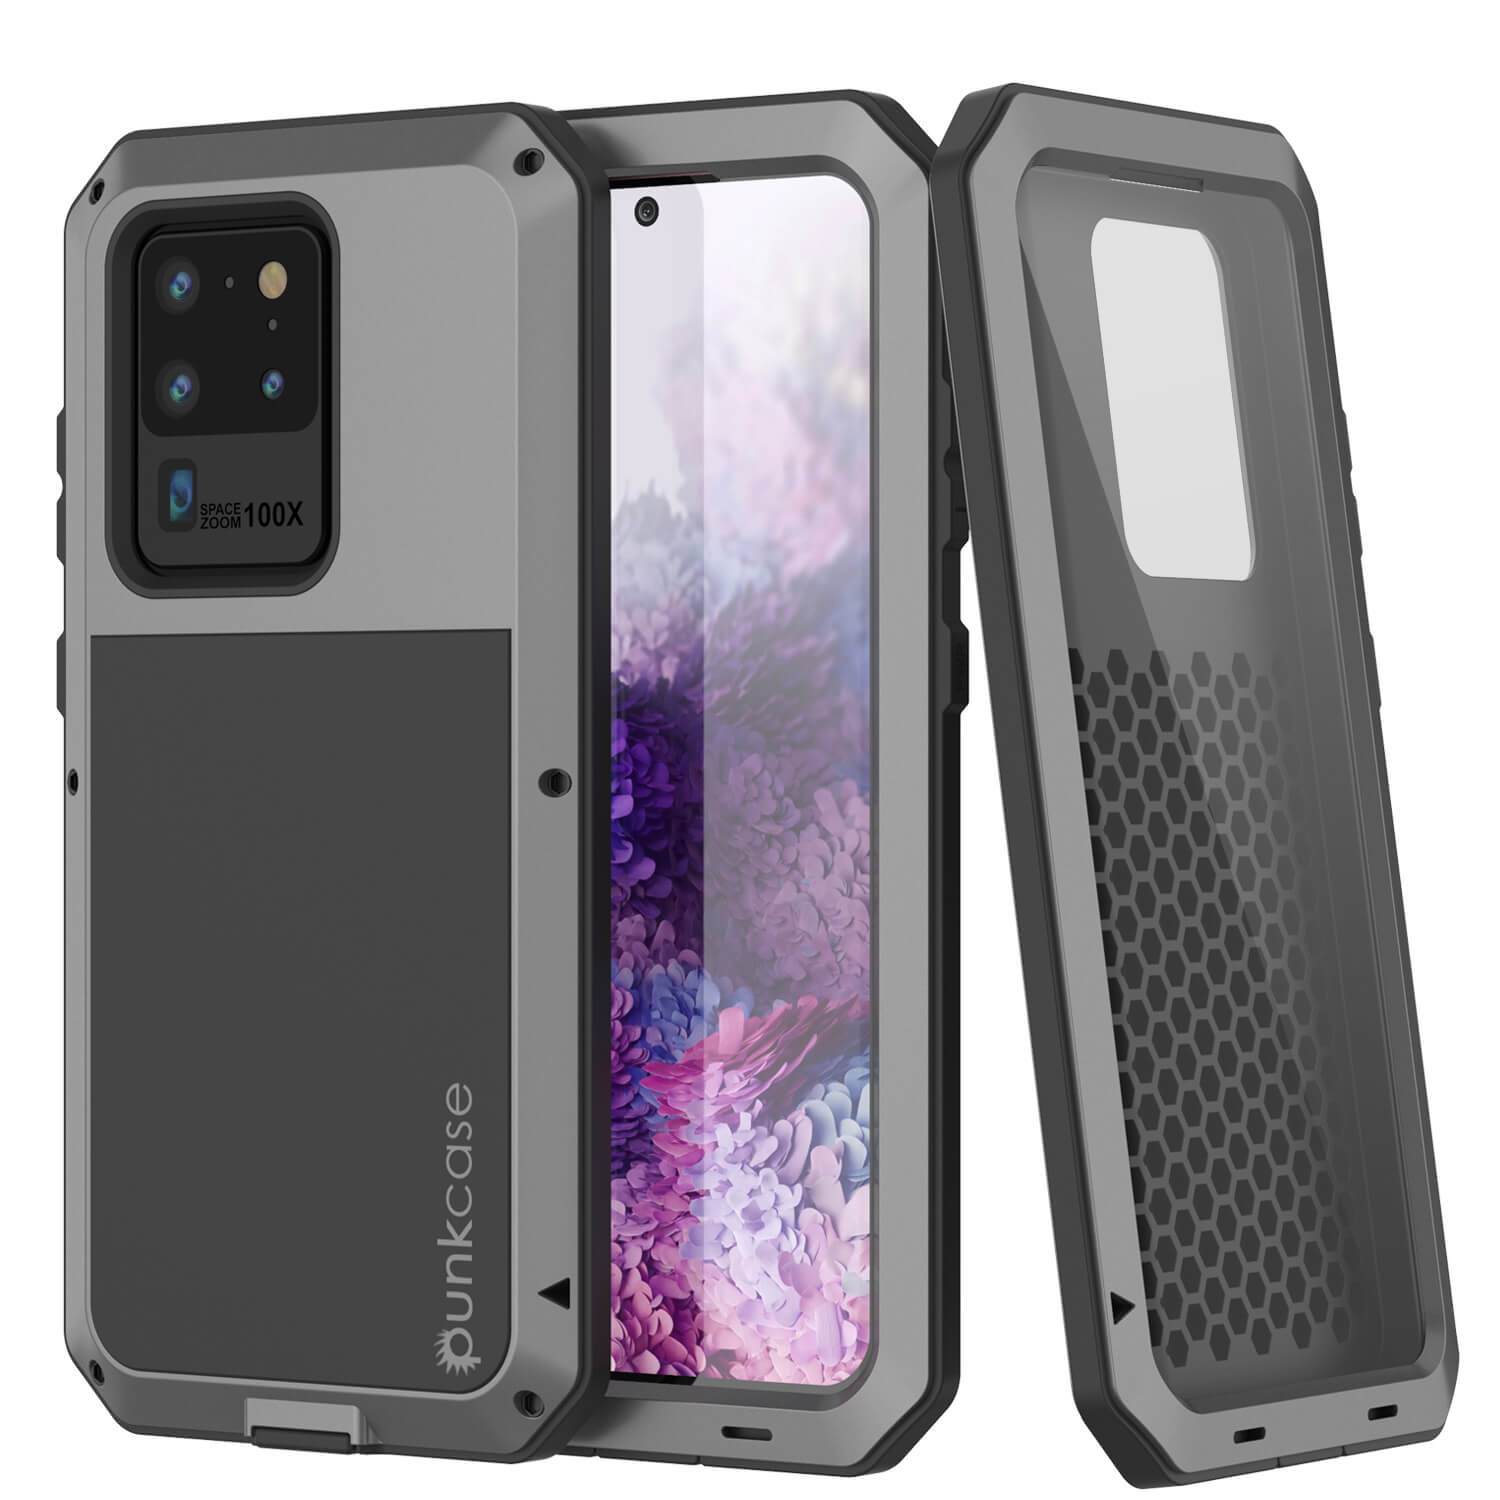 Galaxy S20 Ultra Metal Case, Heavy Duty Military Grade Rugged Armor Cover [Silver] (Color in image: Silver)